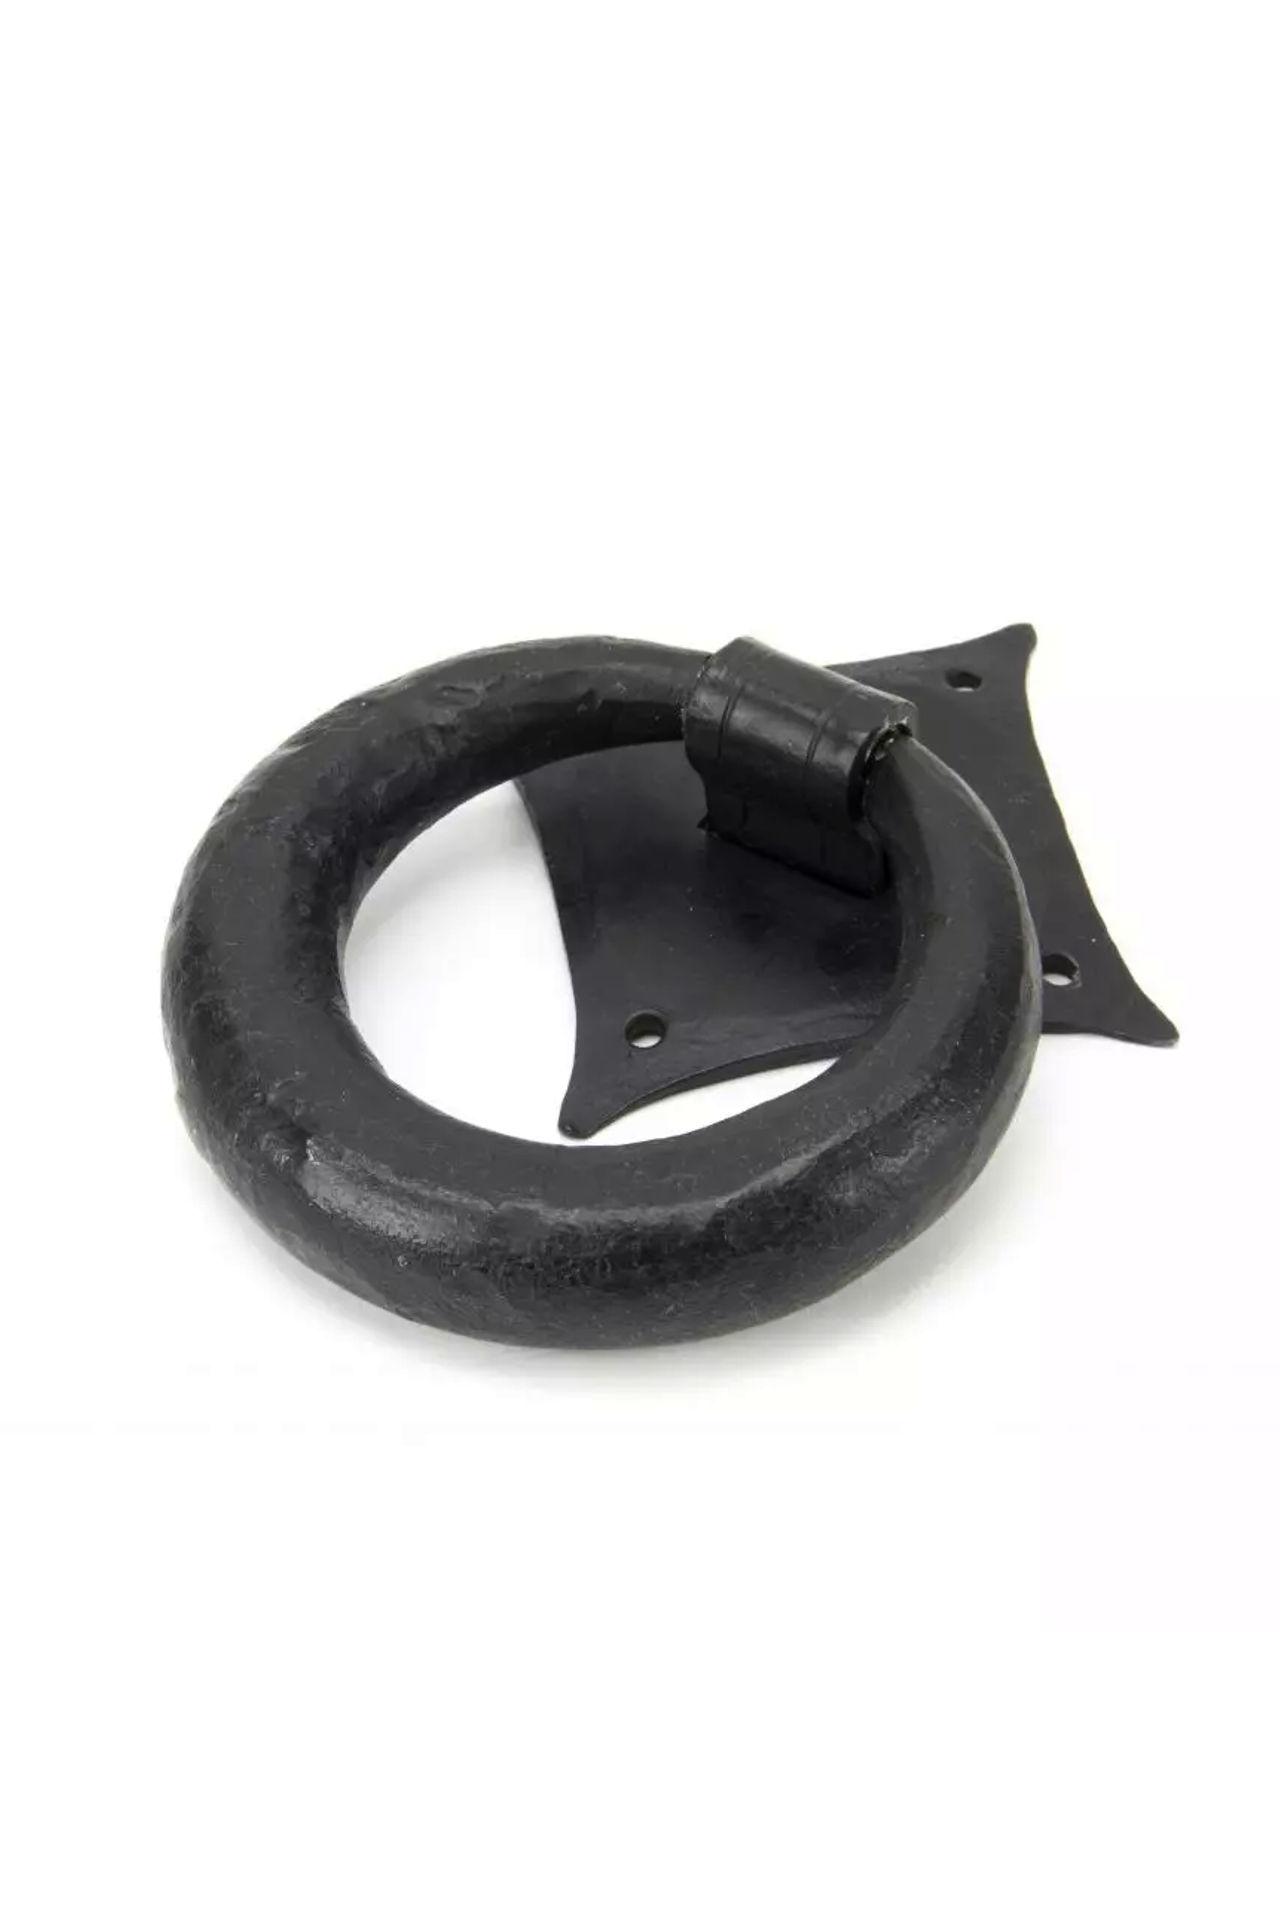 NEW From The Anvil External Beeswax Ring Door Knocker